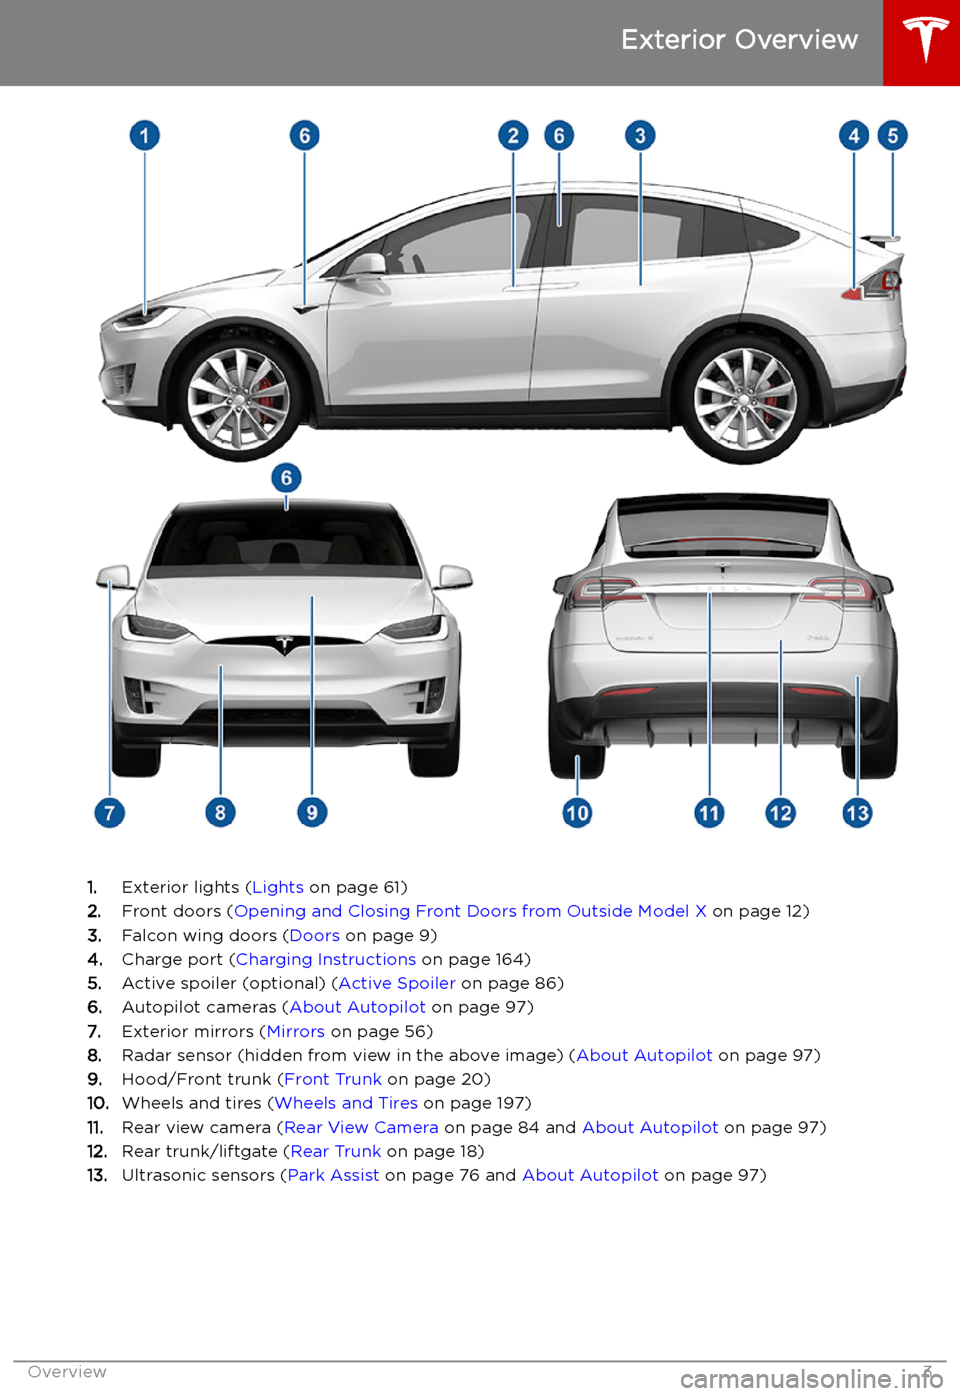 TESLA MODEL X 2019  Owners Manual  Exterior Overview
1.Exterior lights ( Lights on page 61)
2. Front doors ( Opening and Closing Front Doors from Outside Model X  on page 12)
3. Falcon wing doors ( Doors on page 9)
4. Charge port ( Cha